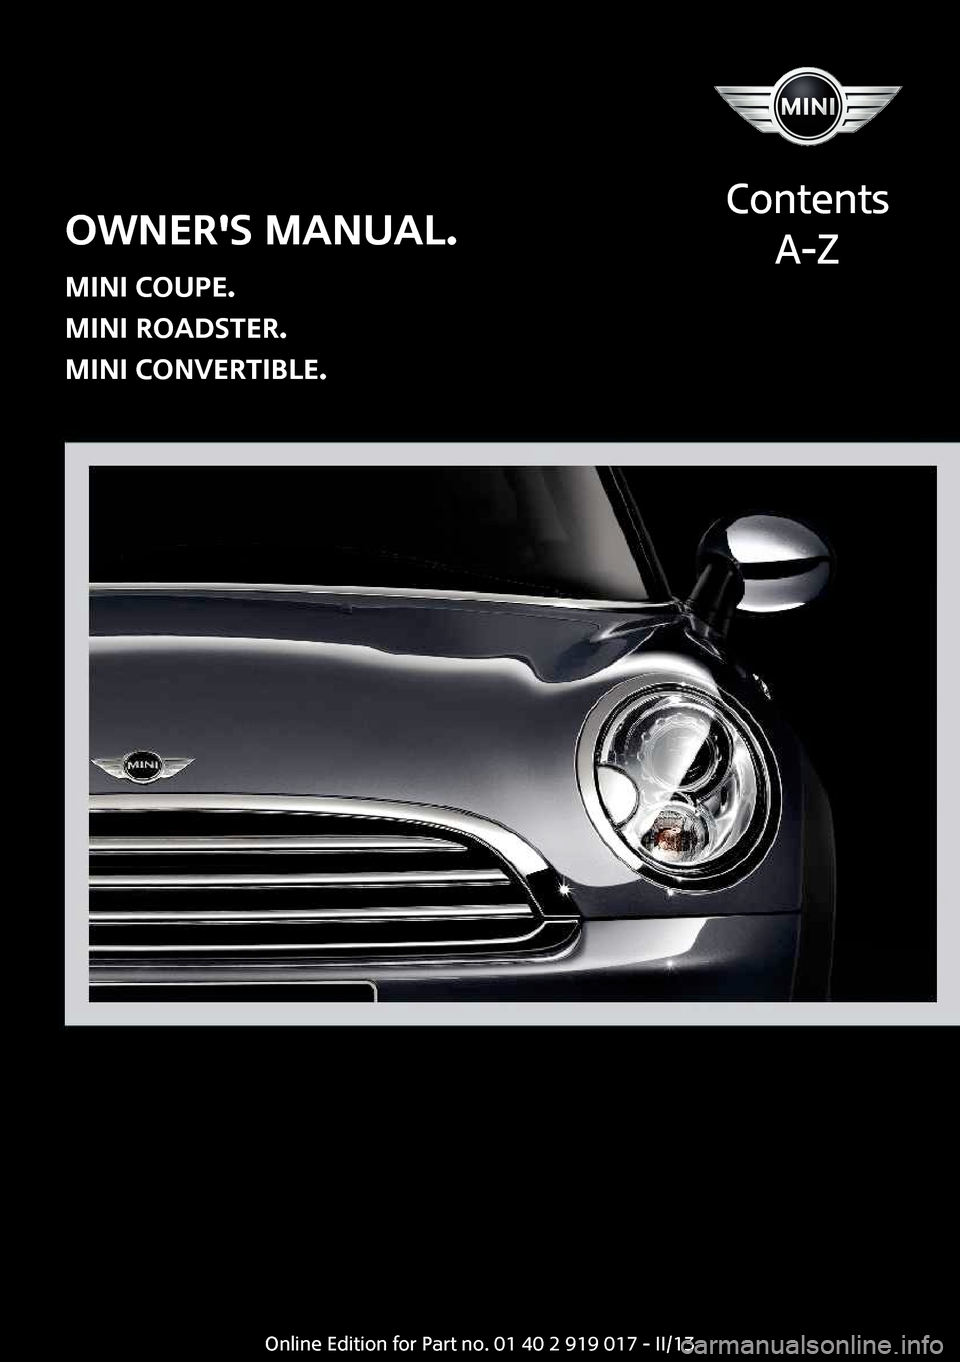 MINI Coupe 2013  Owners Manual Owners Manual.
MINI Coupe.
MINI Roadster.
MINI Convertible.
Contents
A-ZOnline Edition for Part no. 01 40 2 919 017 - II/13  